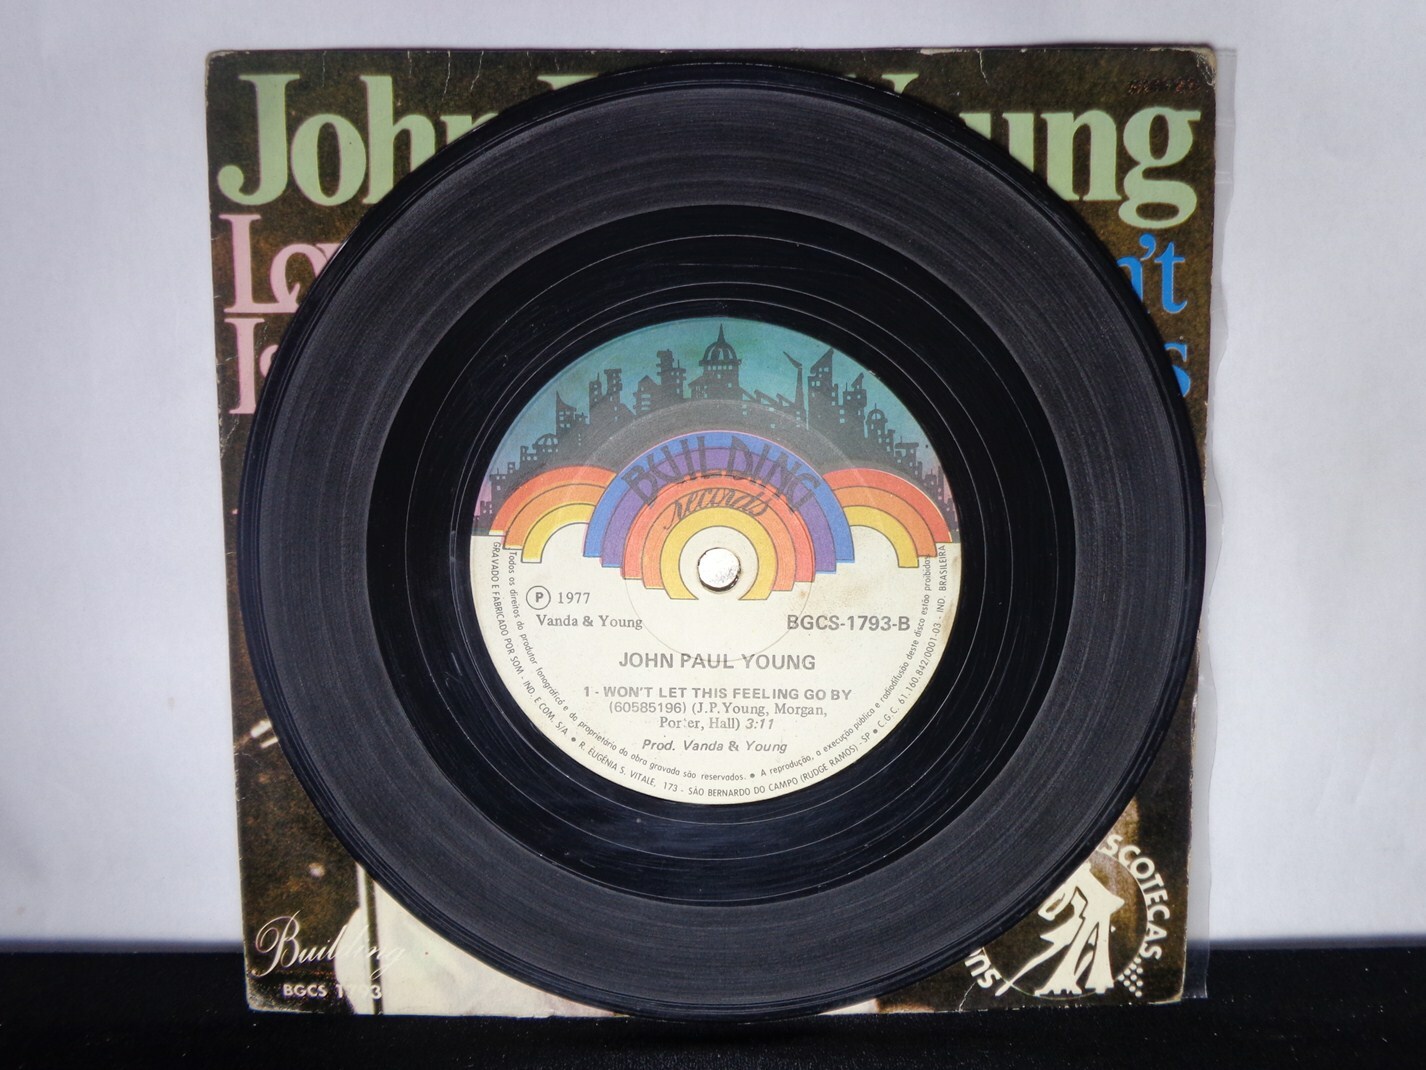 Vinil Compacto - John Paul Young - Love is in the Air / Wont Let This Feeling Go By